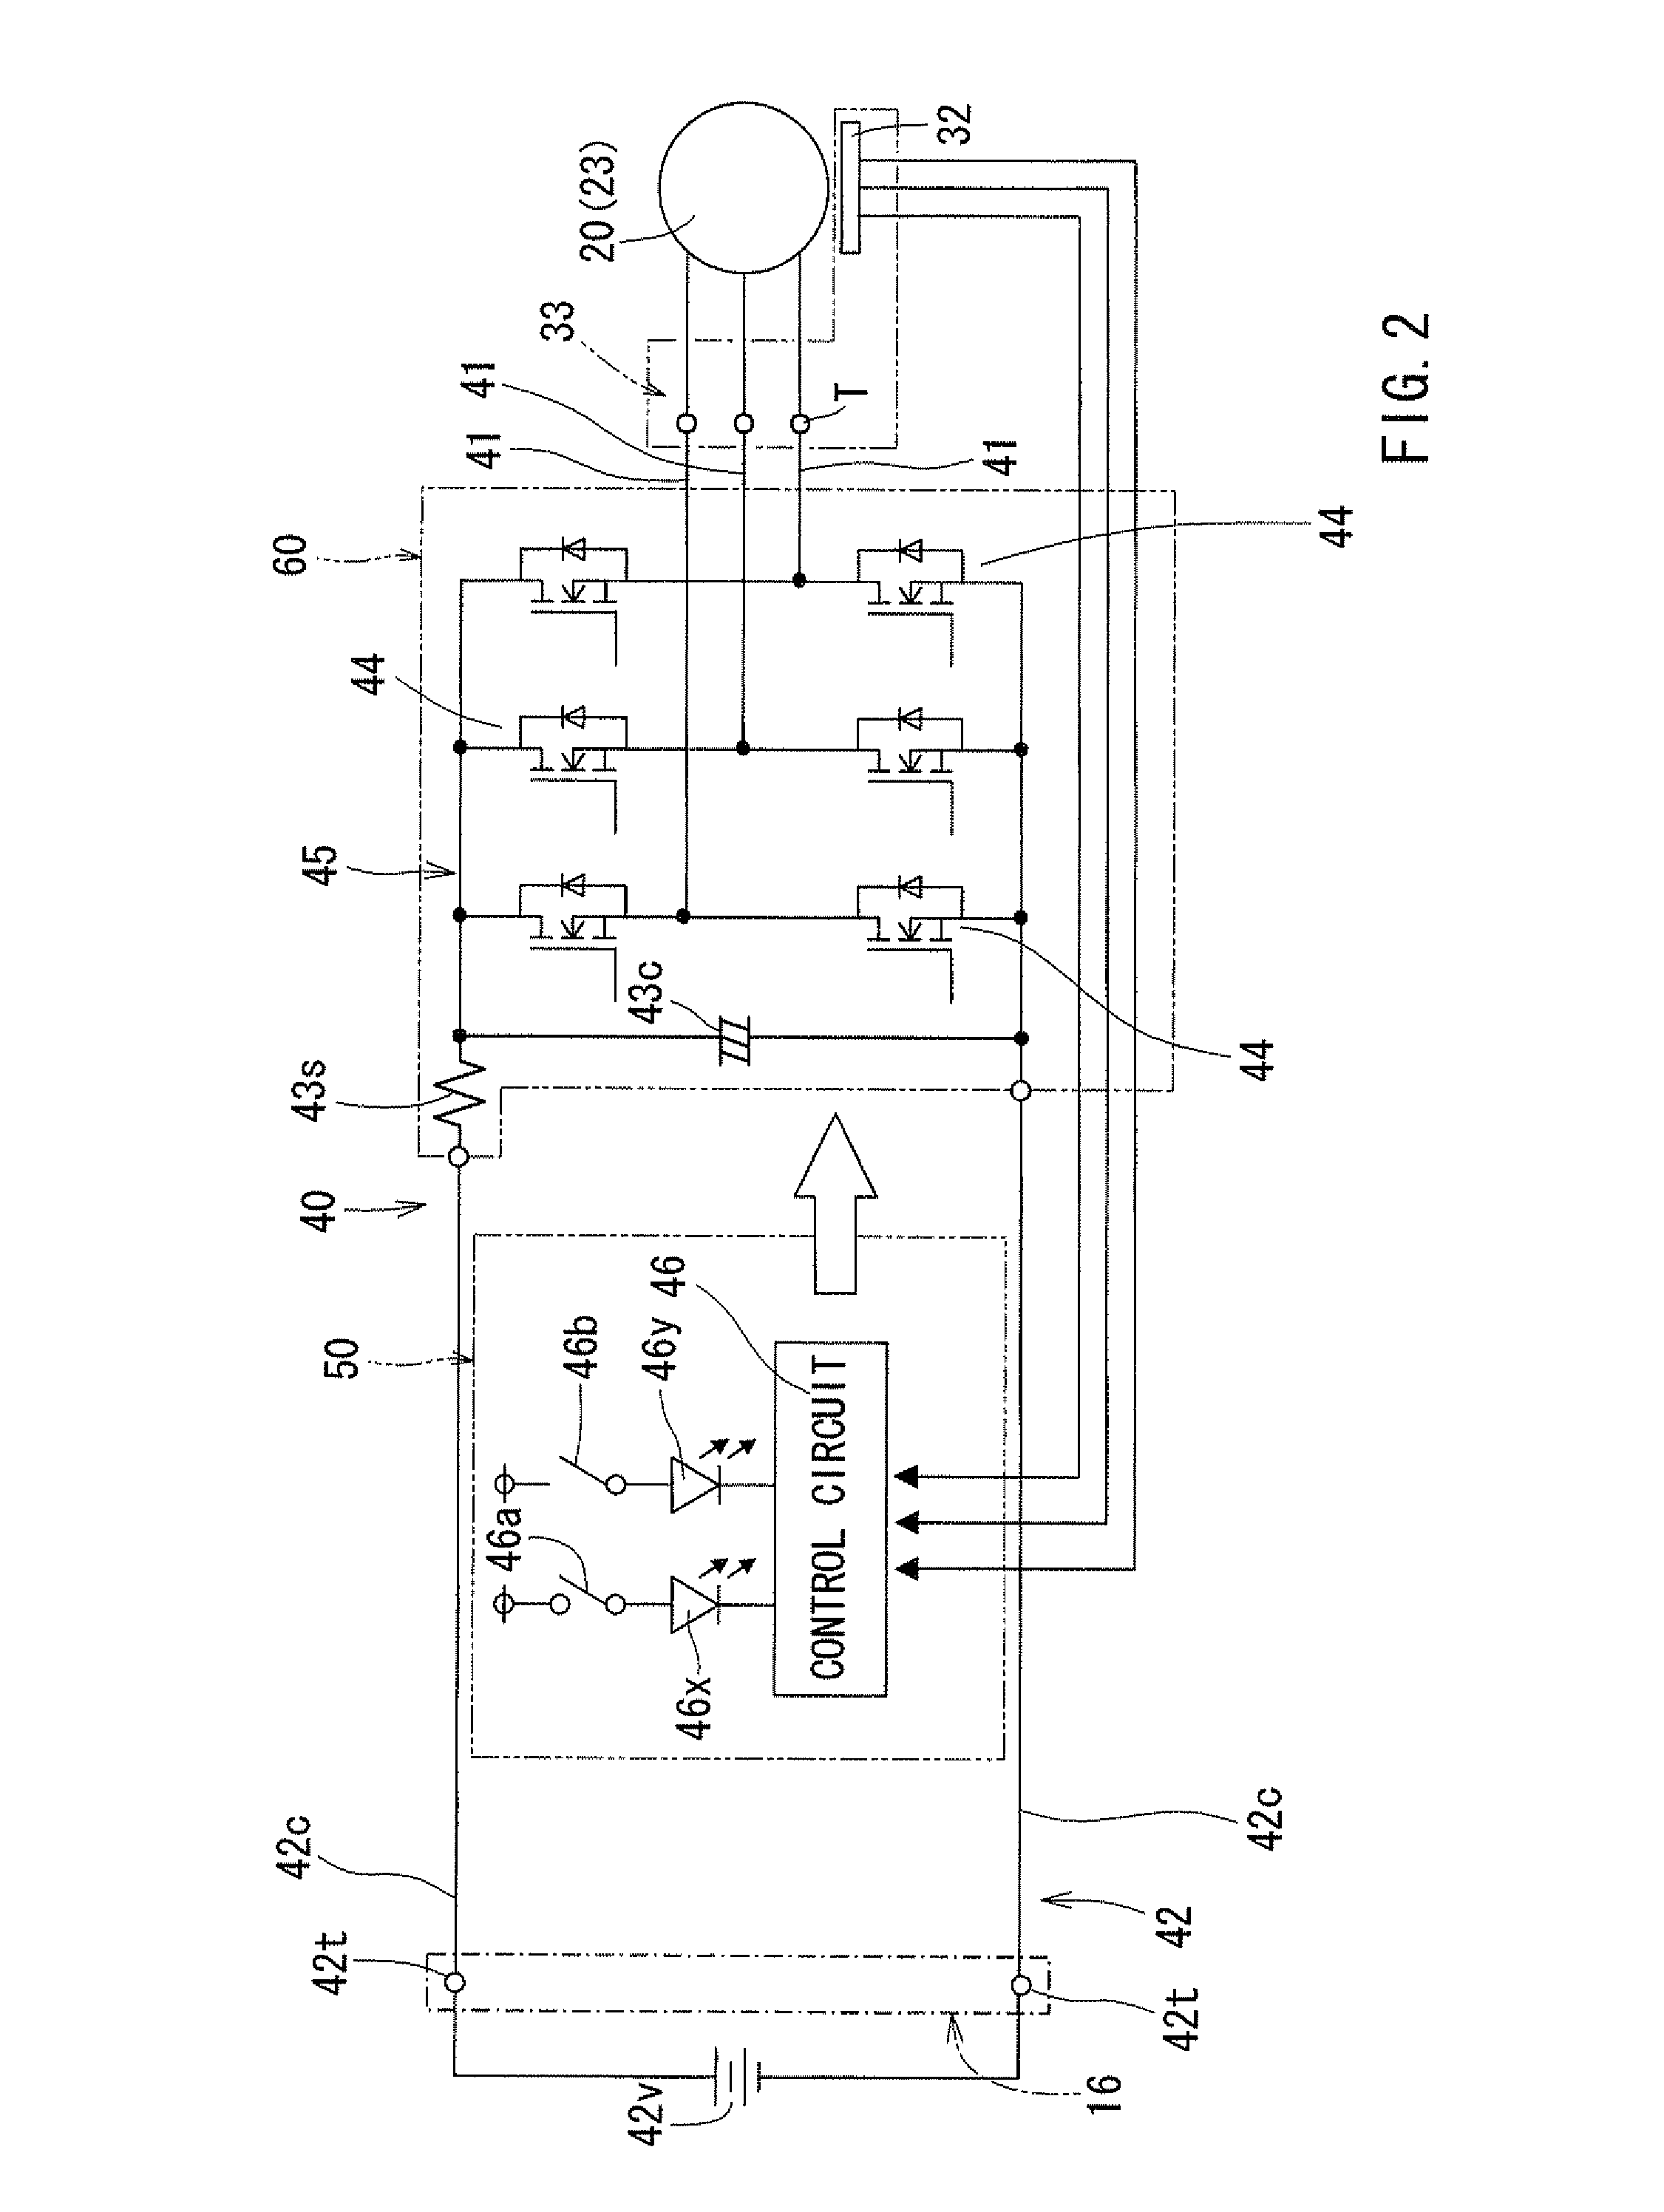 Electric power tool including a plurality of circuit boards